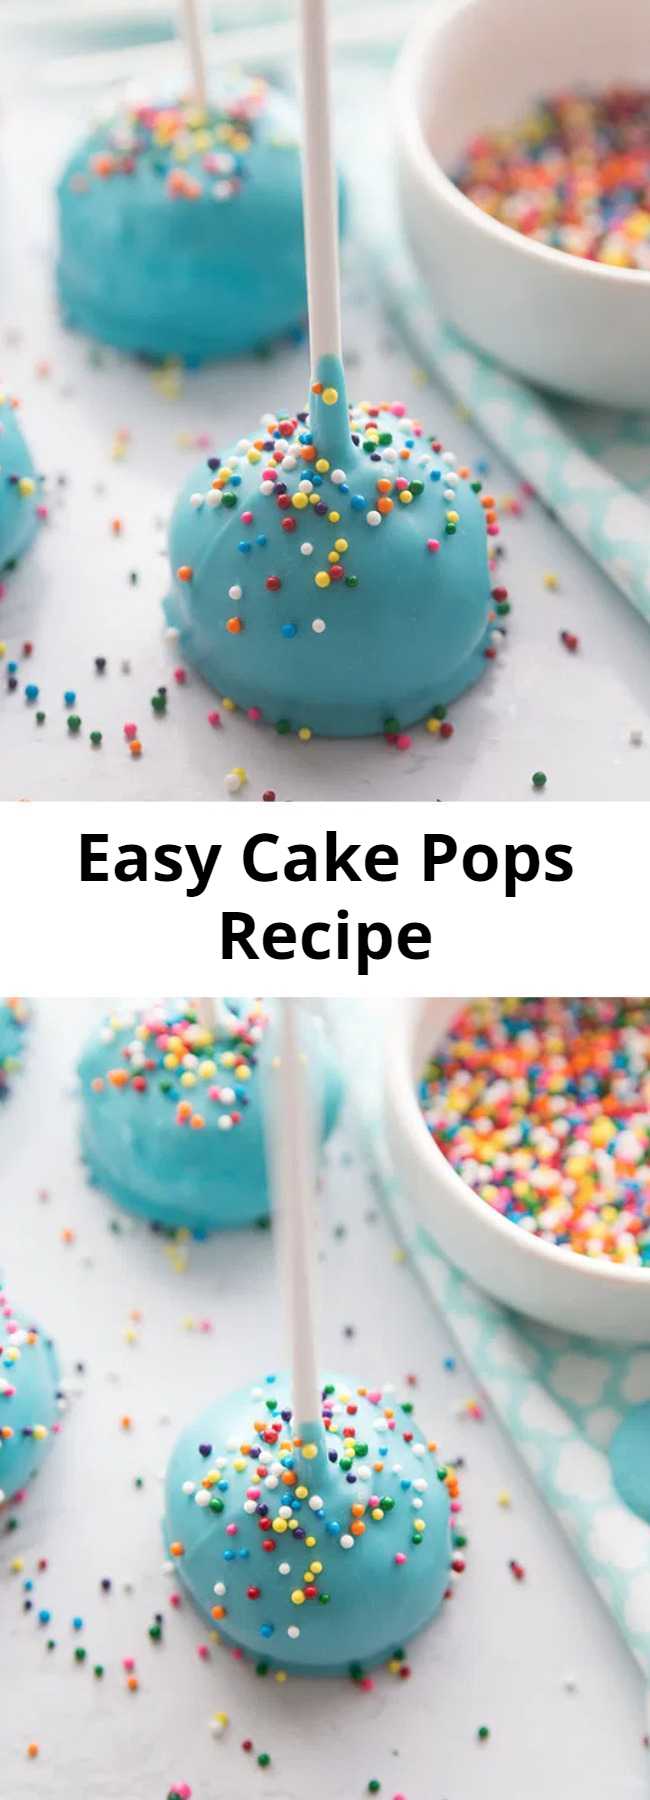 Easy Cake Pops Recipe - Such a fun and easy treat to make with kids! Perfect to make for birthday parties too! #recipes #kidsrecipes #snacks #treats #bestideasforkids